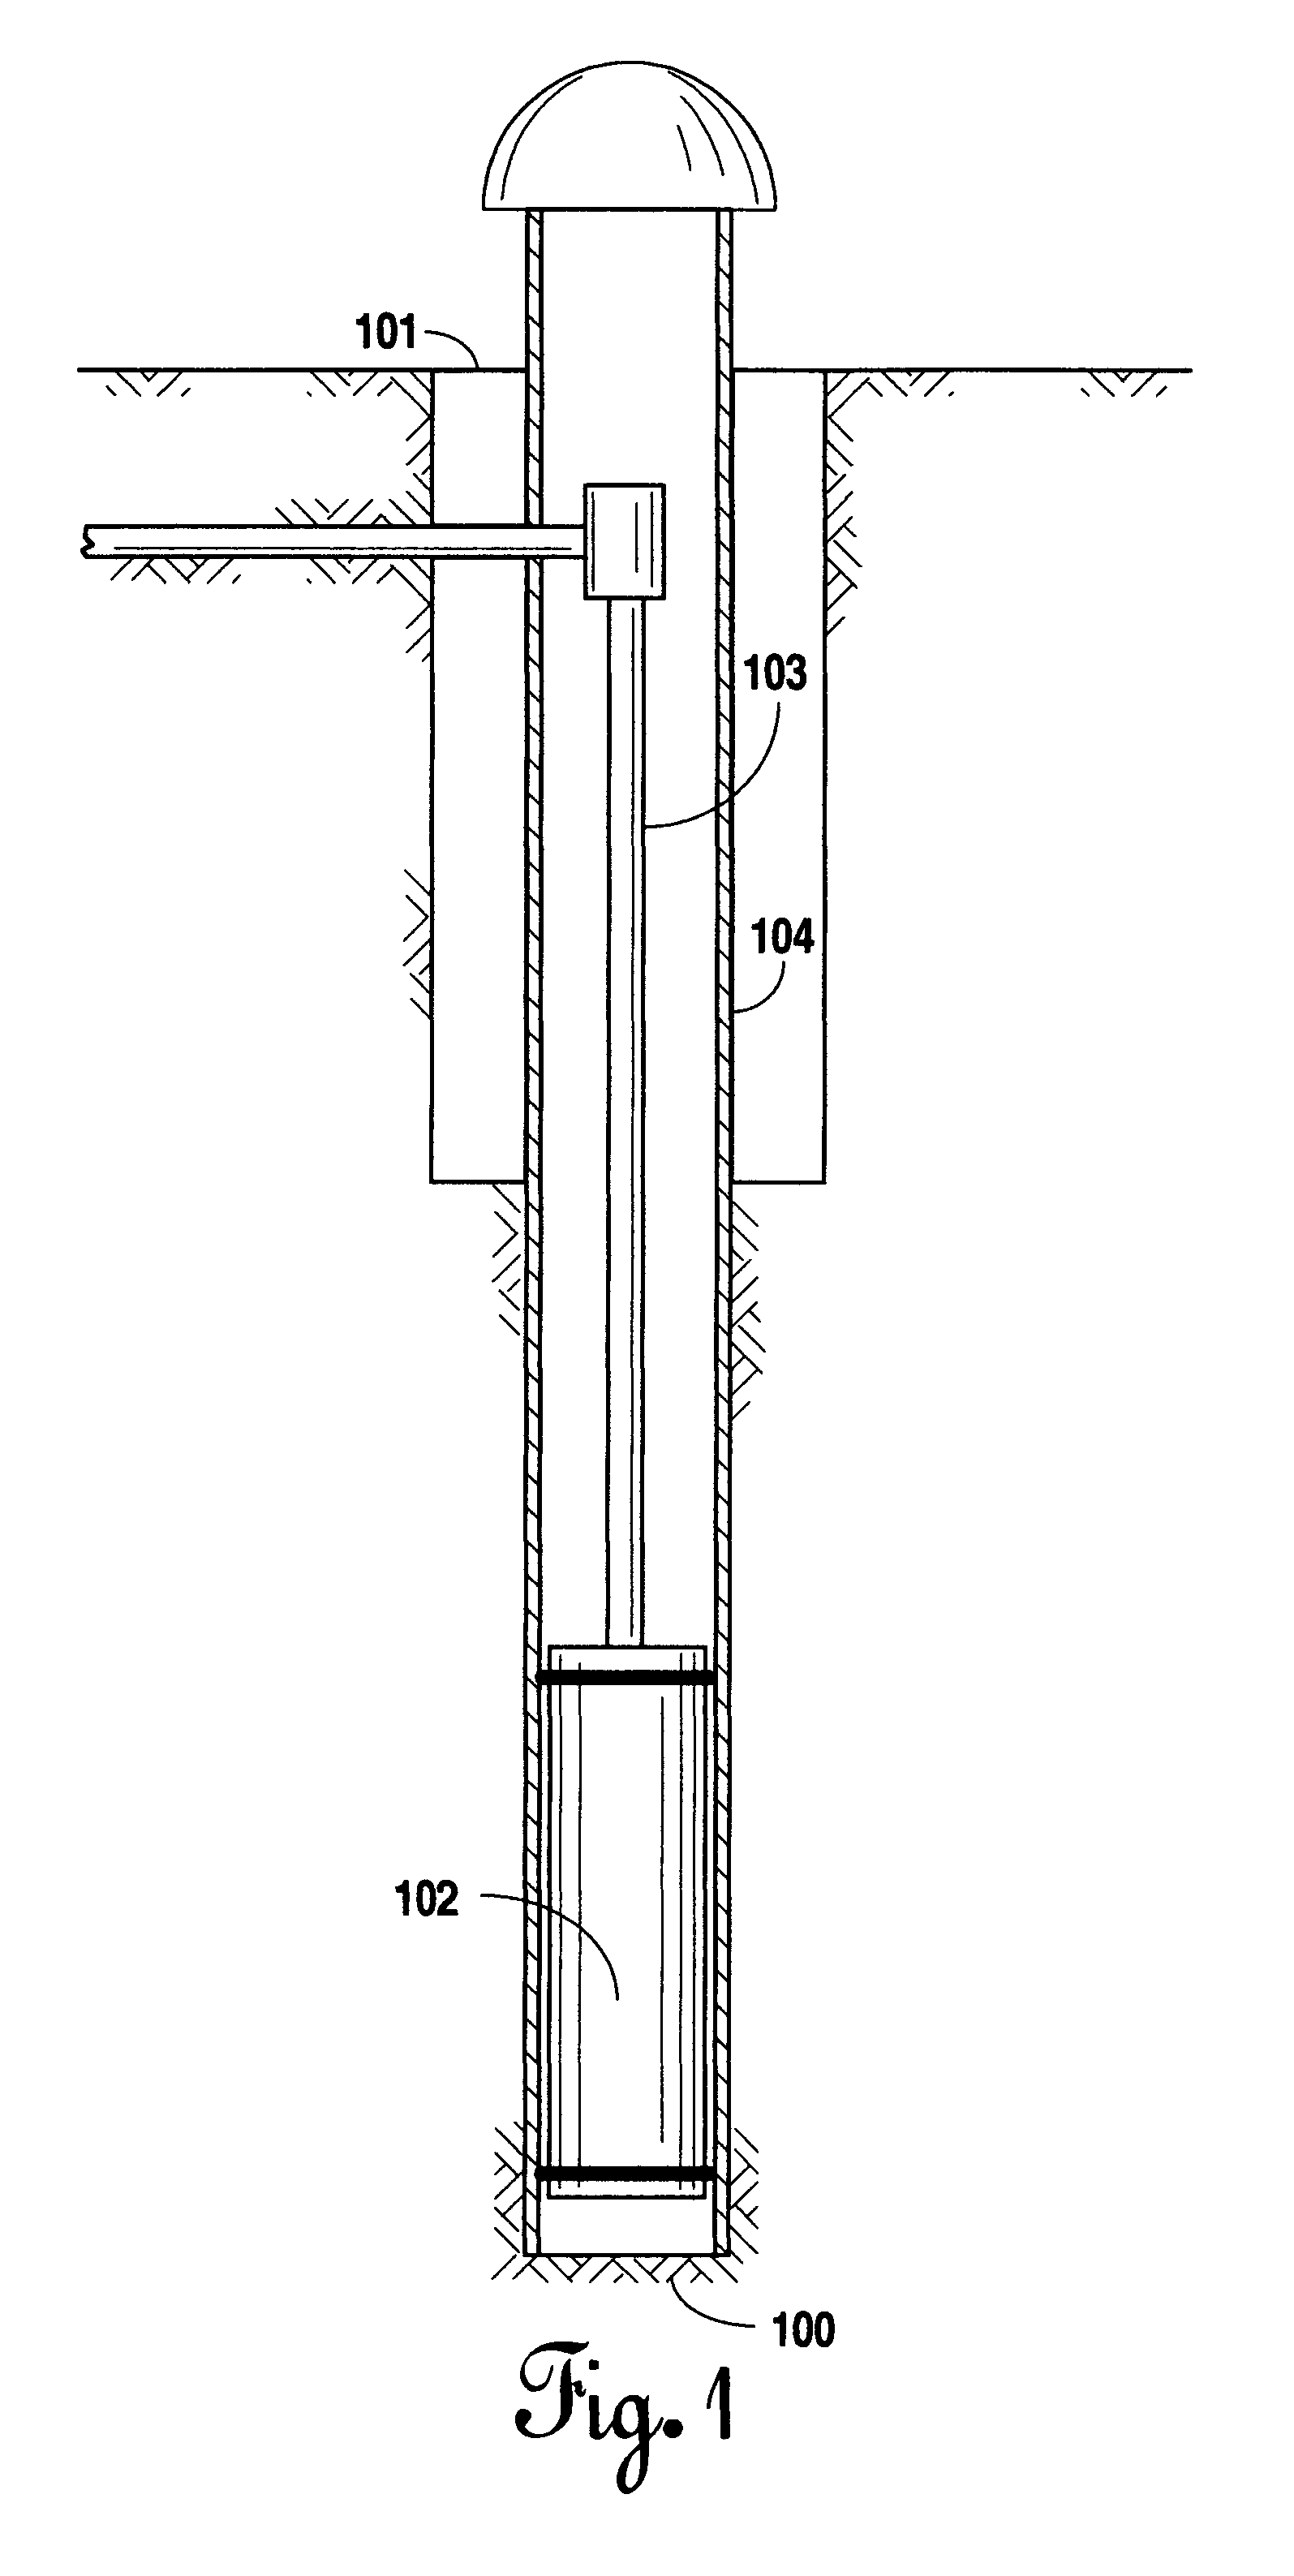 Submersible pump drop pipe and casing assembly connection and method of manufacture